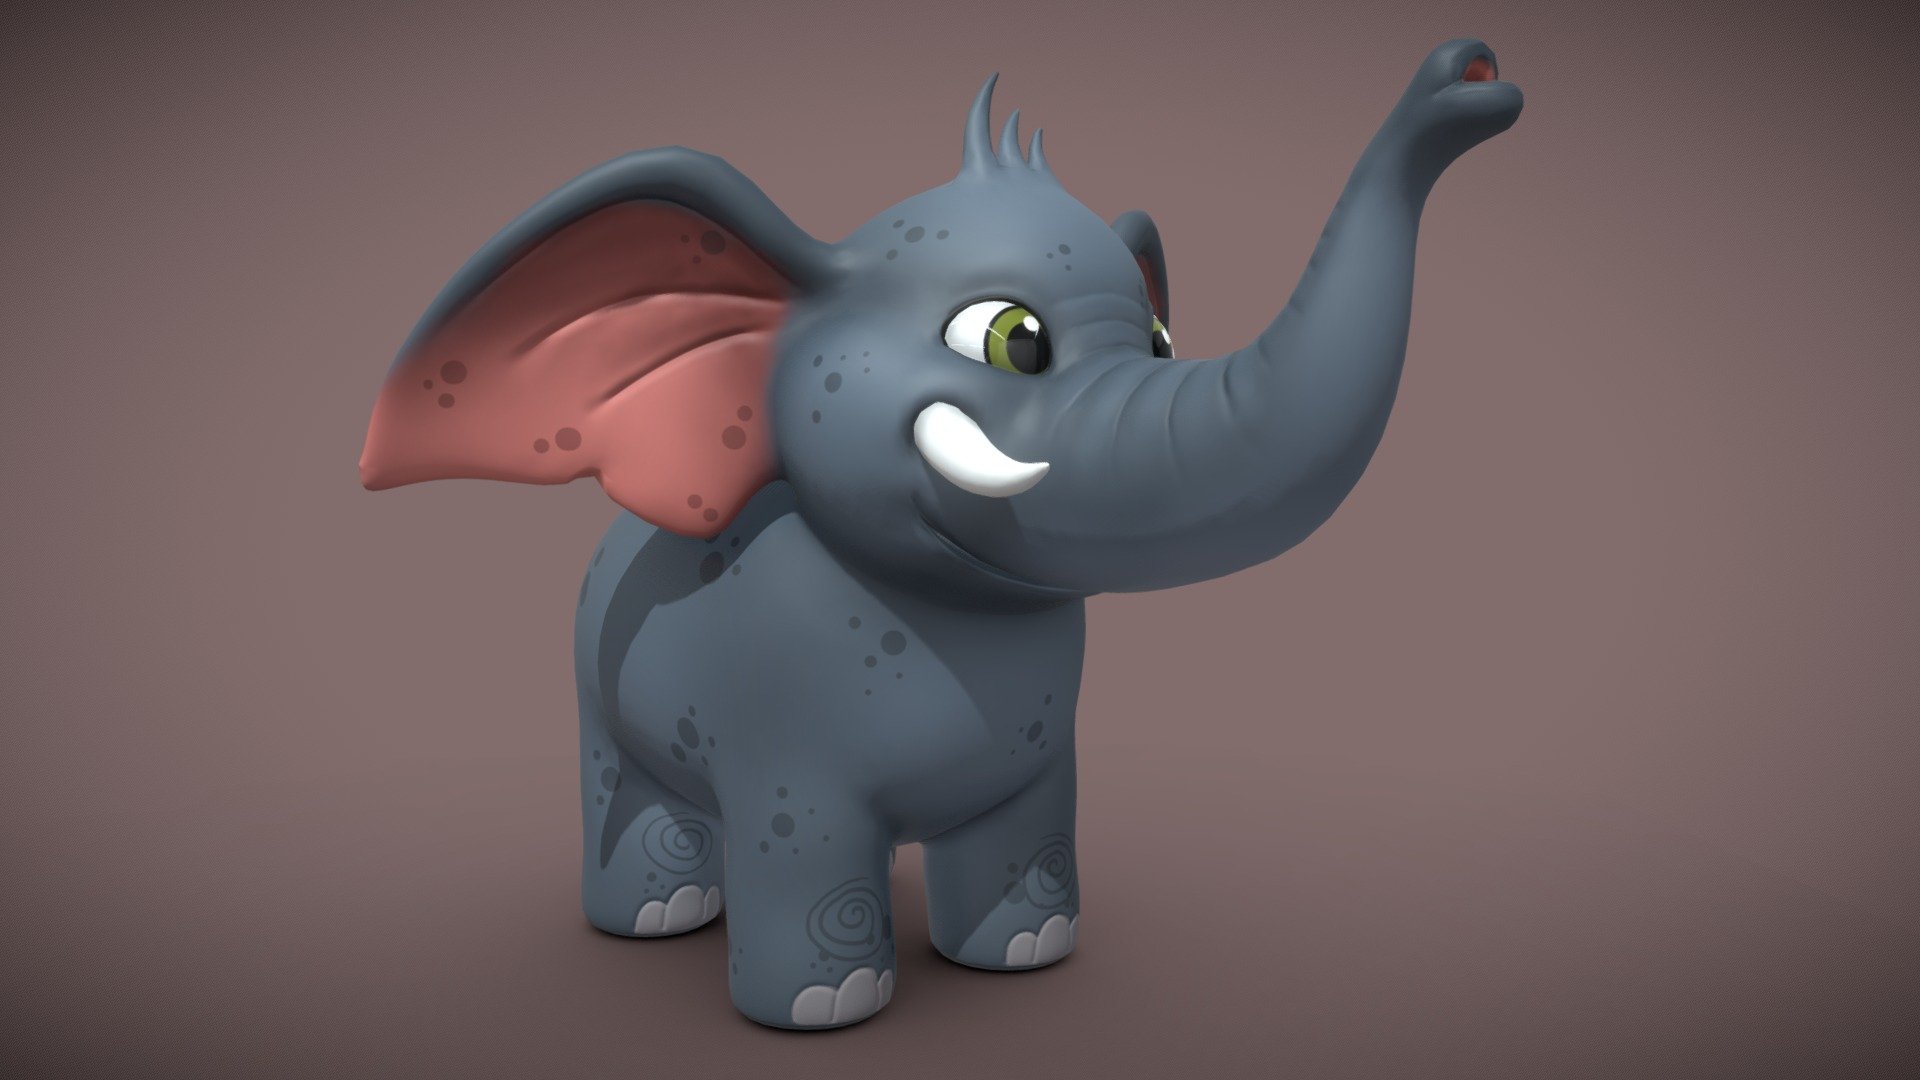 Game ready stylized elephant model with 4k hand painted textures , ready for rigging and animation .
for more info you can visit : https://www.youtube.com/watch?v=fWVlksp6msQ&amp;amp;t=68s

Attached file contatins: 

Textures in 4K
Fbx 
Obj
Stl
Blender eevee
Blender cycles - Elephant - Buy Royalty Free 3D model by Split Studios (@splitstudios) 3d model